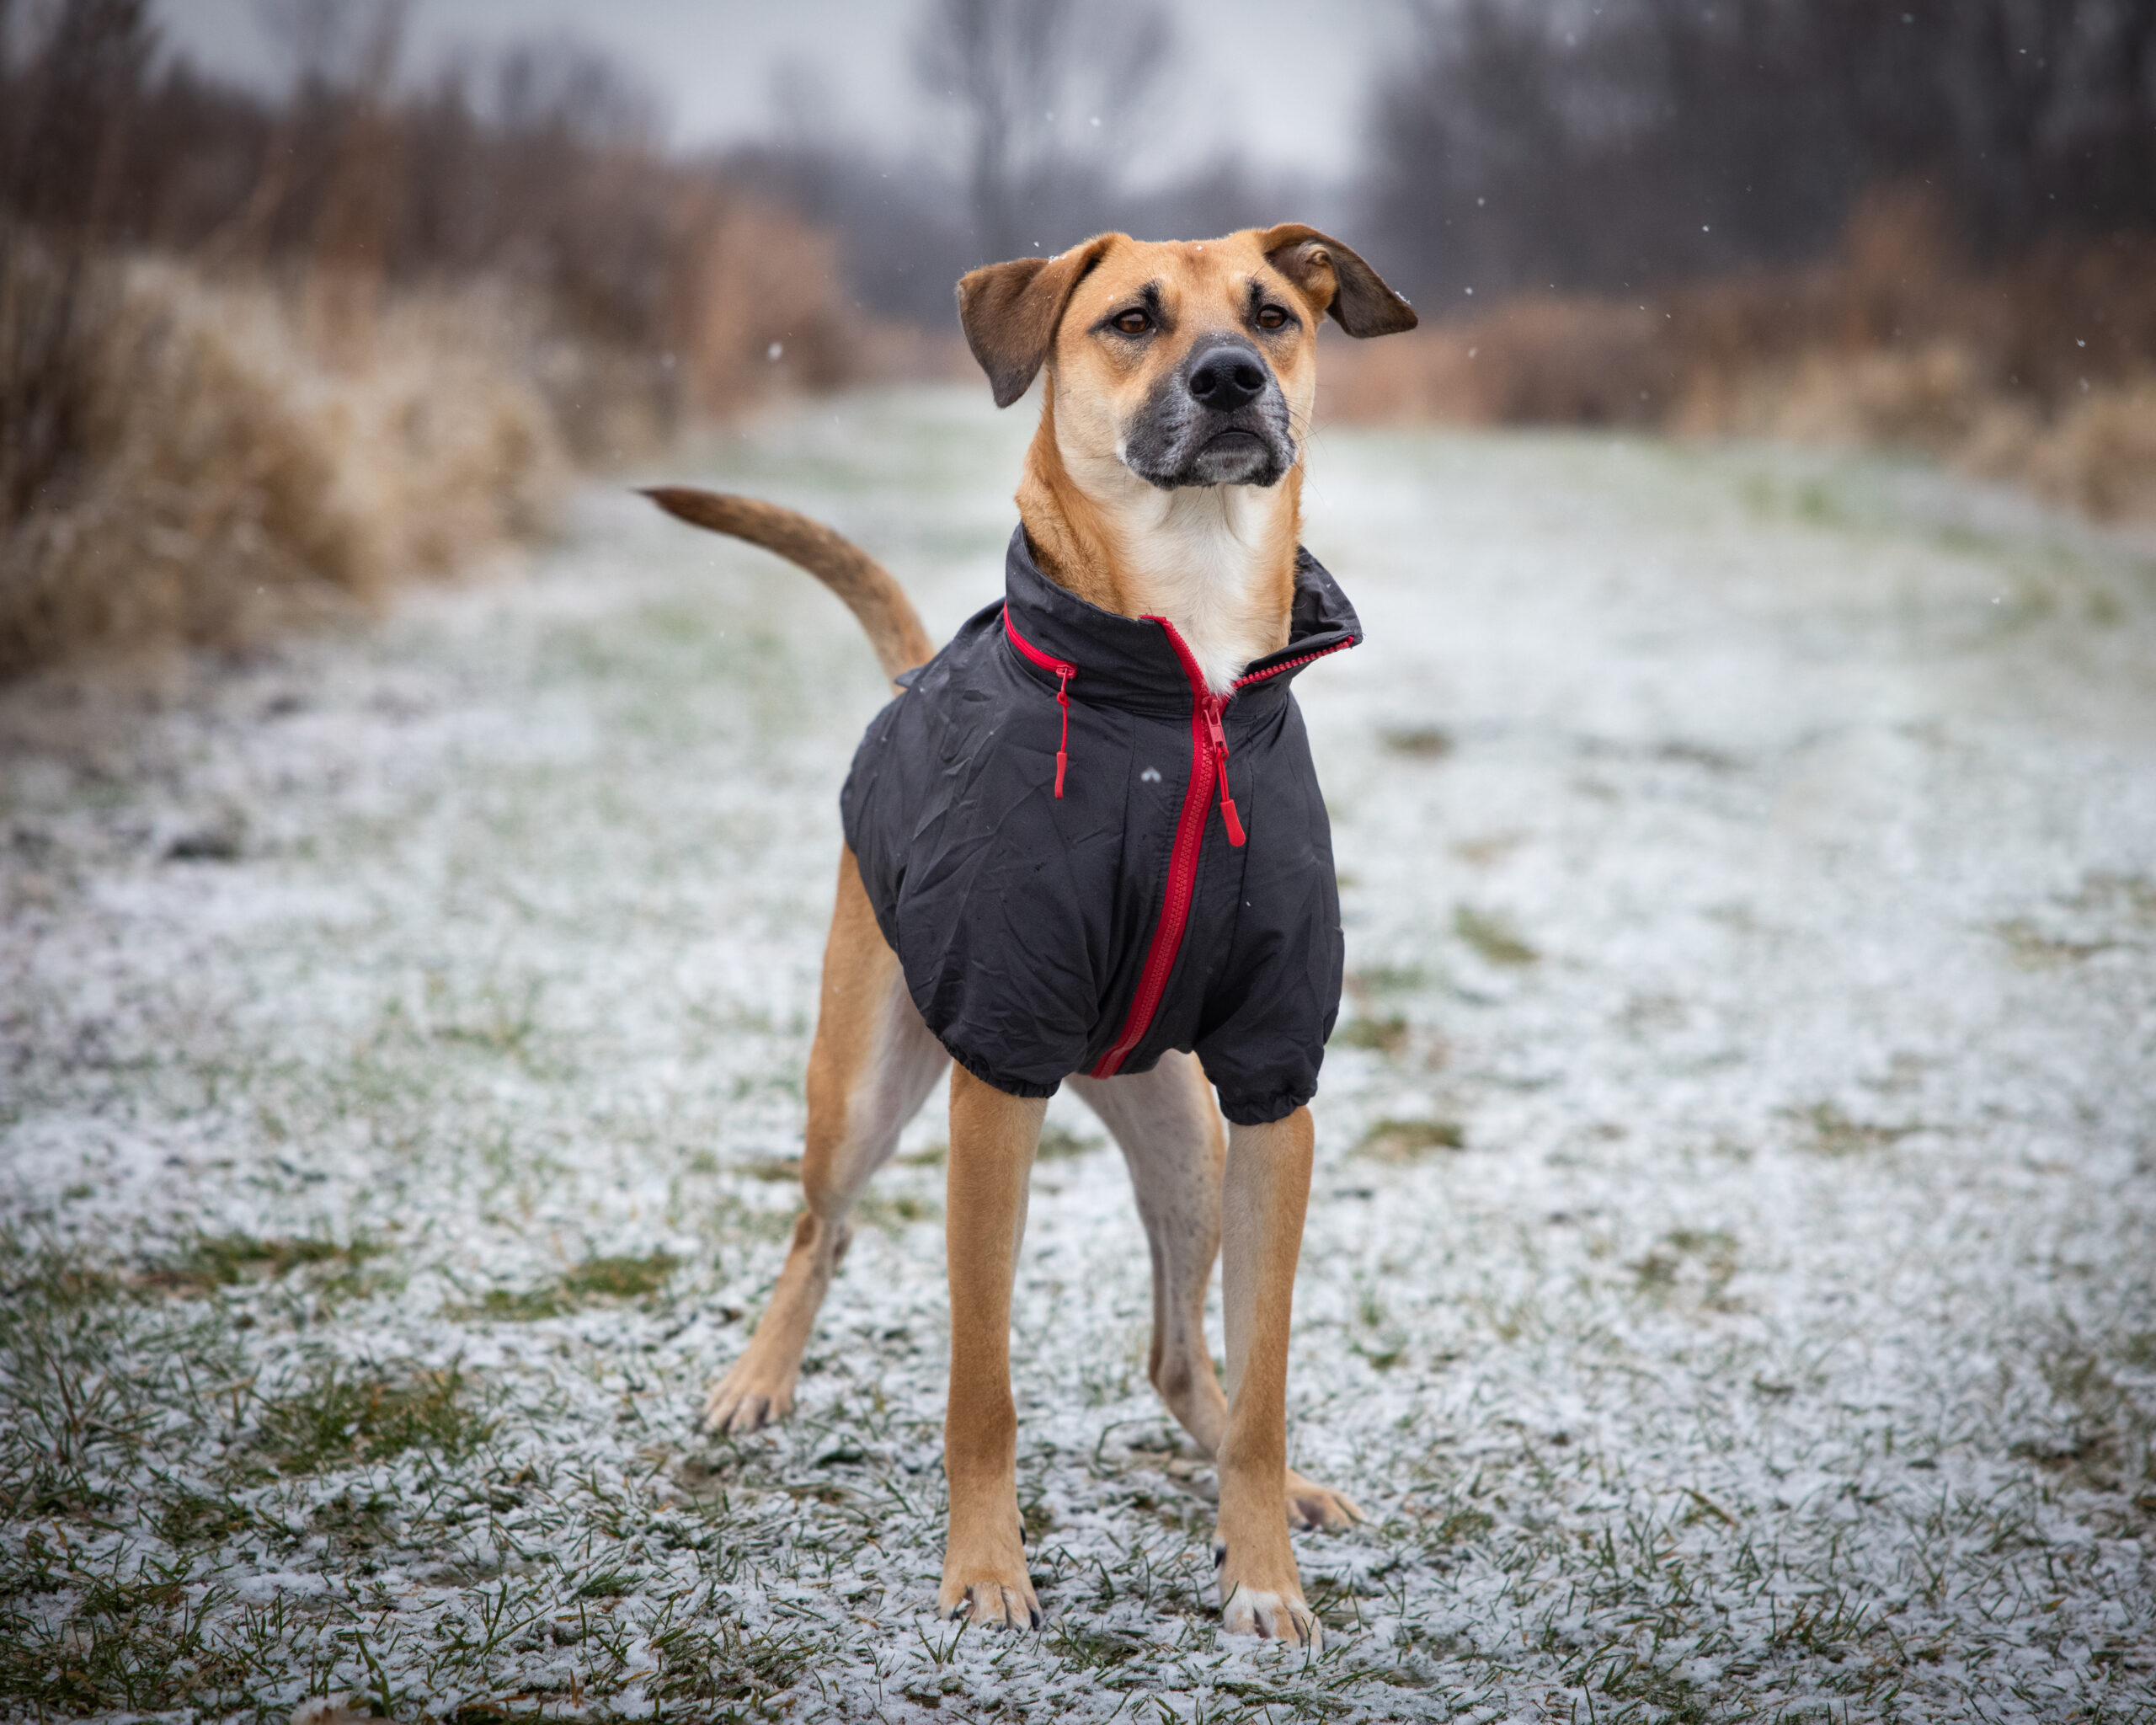 An image of a dog in a winter coat